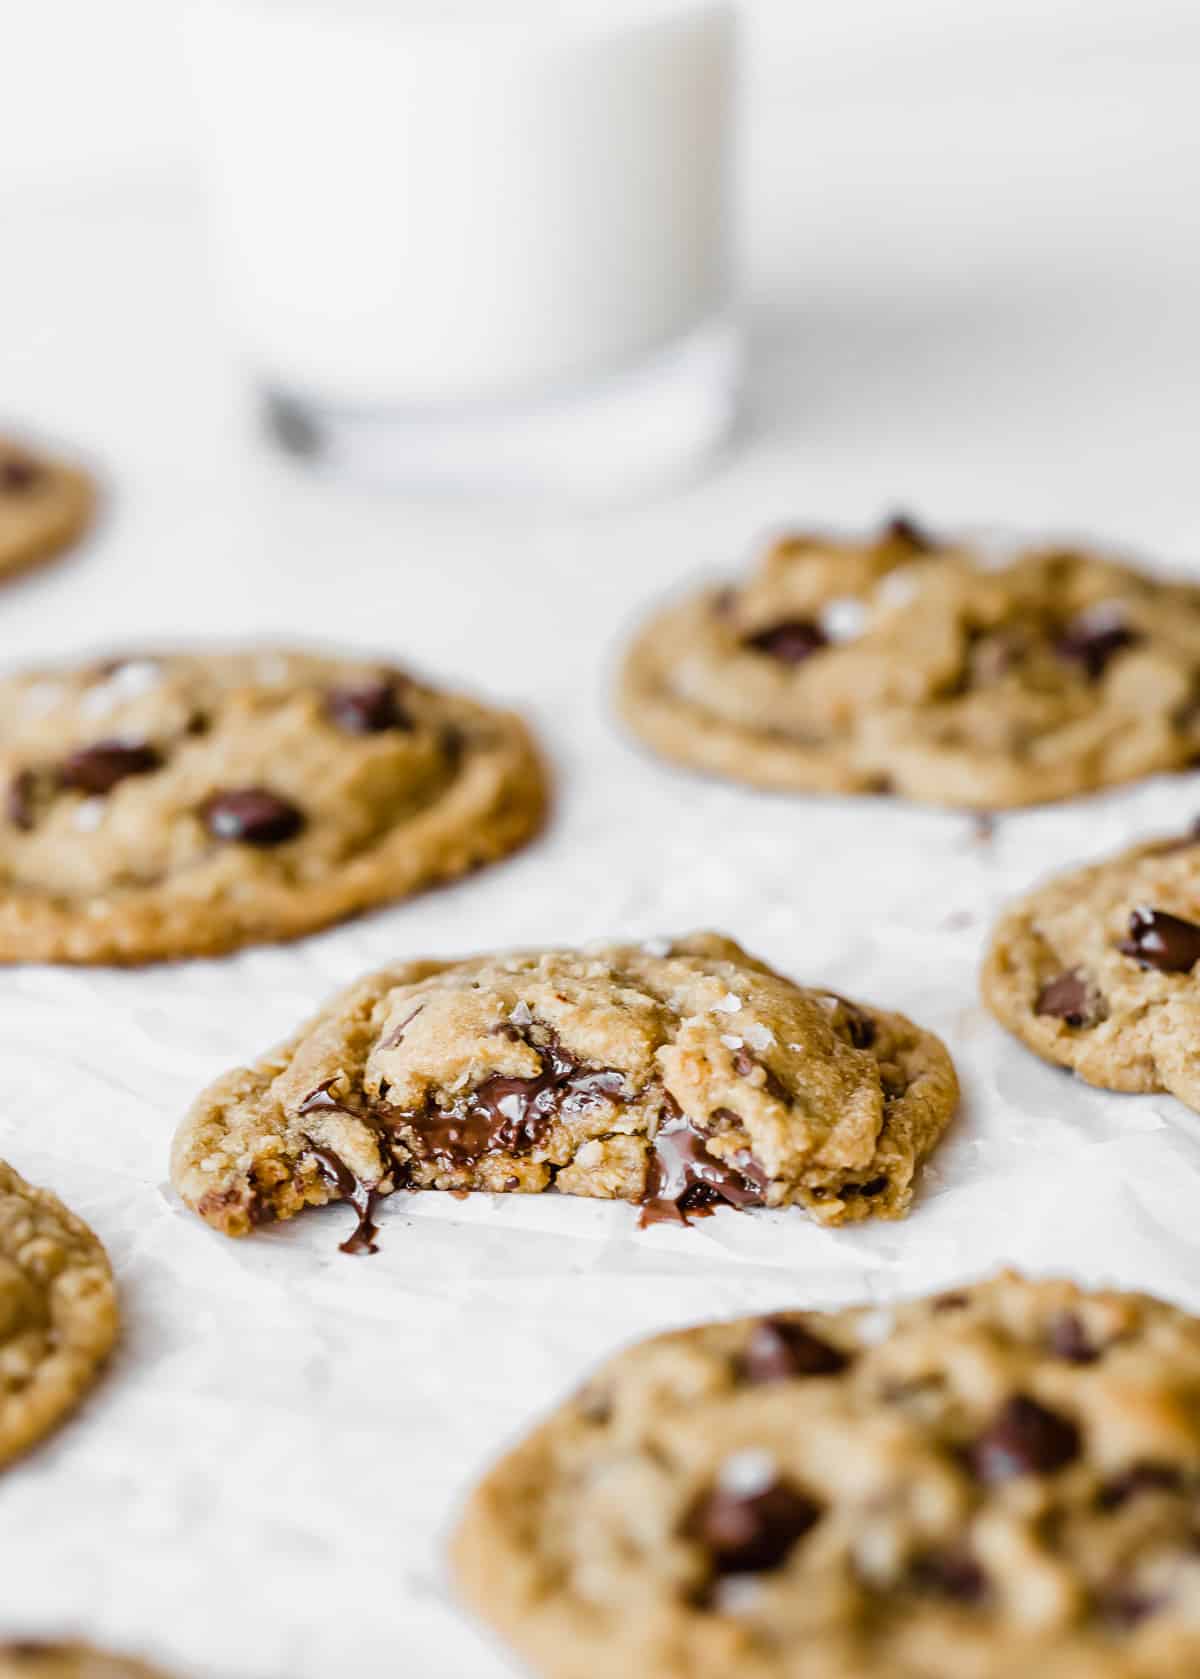 A Brown Butter Chocolate Chip Cookie with a bite taken out of it, on a white parchment paper.